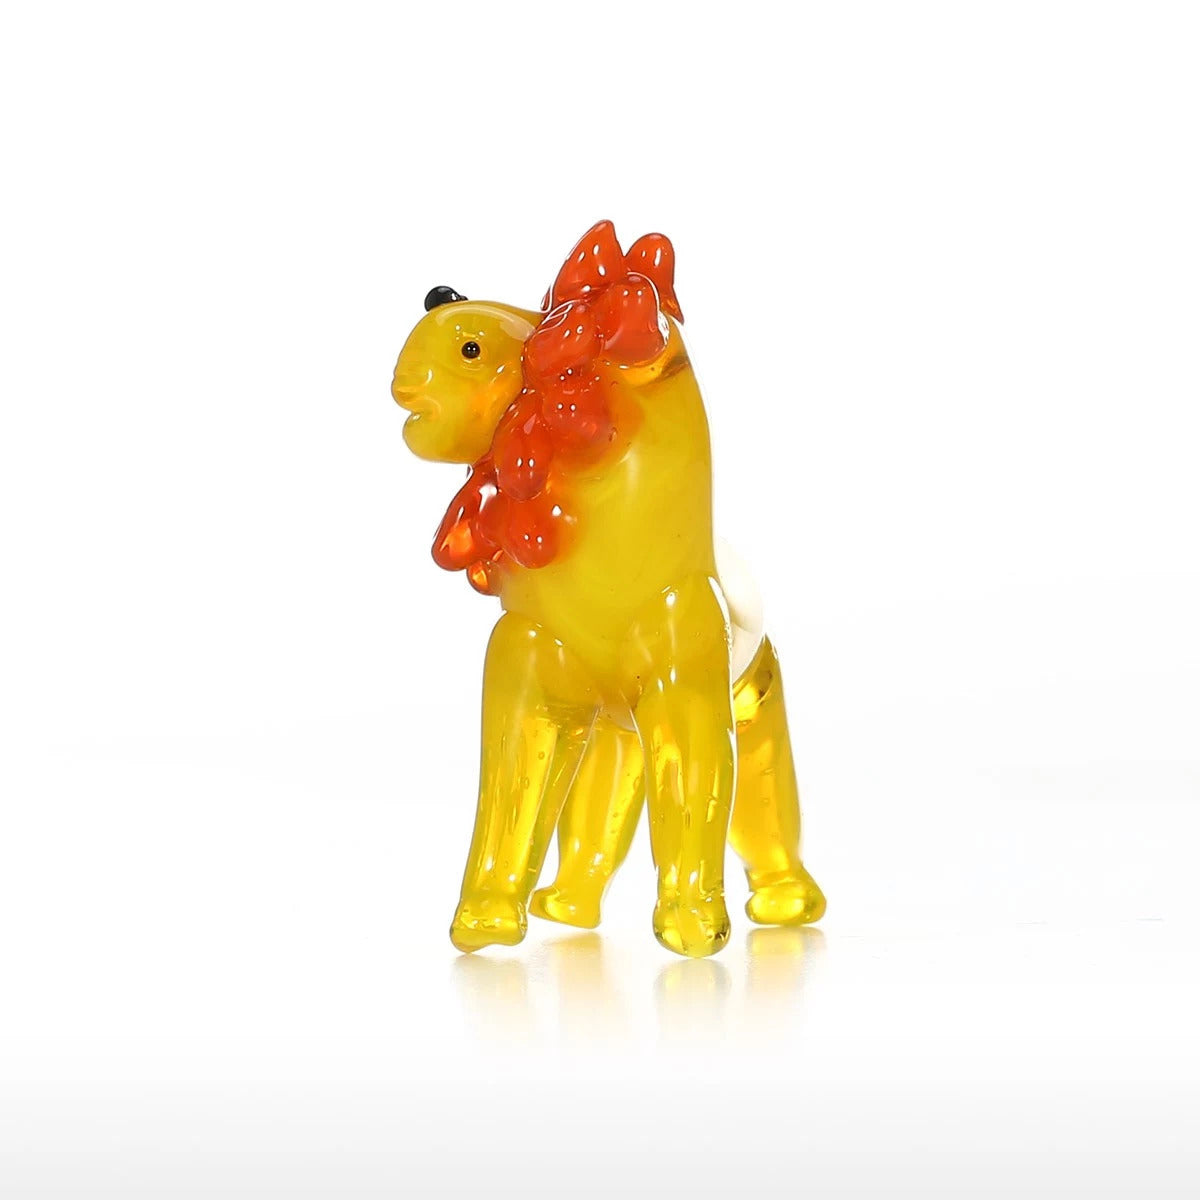 Blown Glass Figurines with Lion Glass Christmas Ornaments